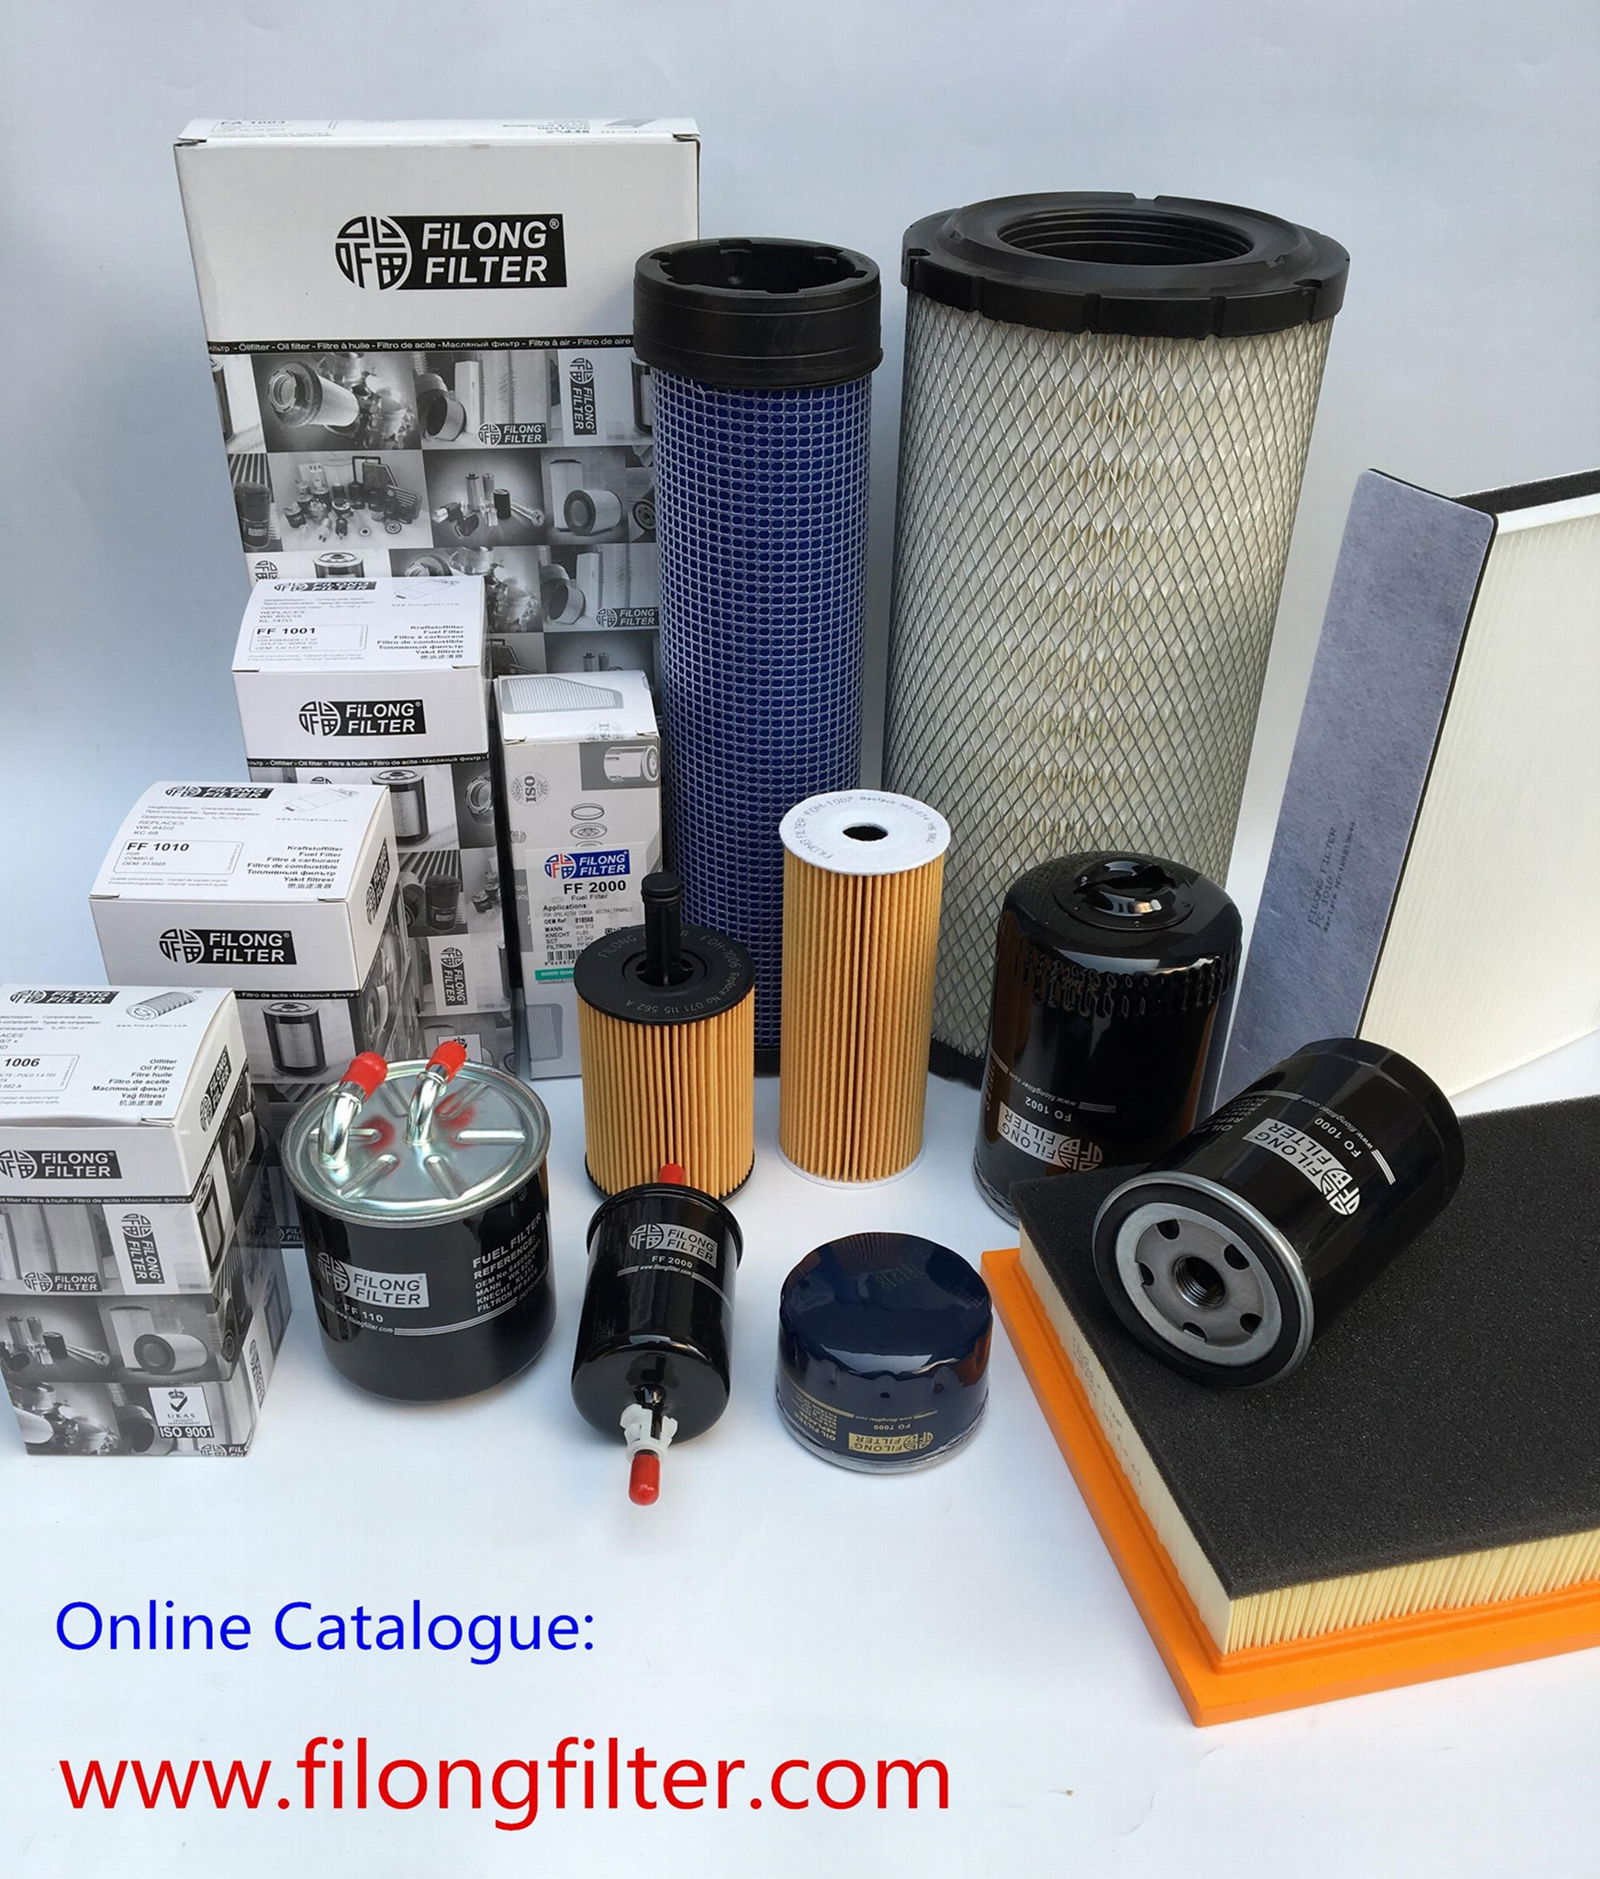 FILONG Manufactory For FIAT Fuel filter 77363657 50522918  60693681 71773197 818011 818020 95514995 1606384980 1901A3  1729042  BS519155A 95513399